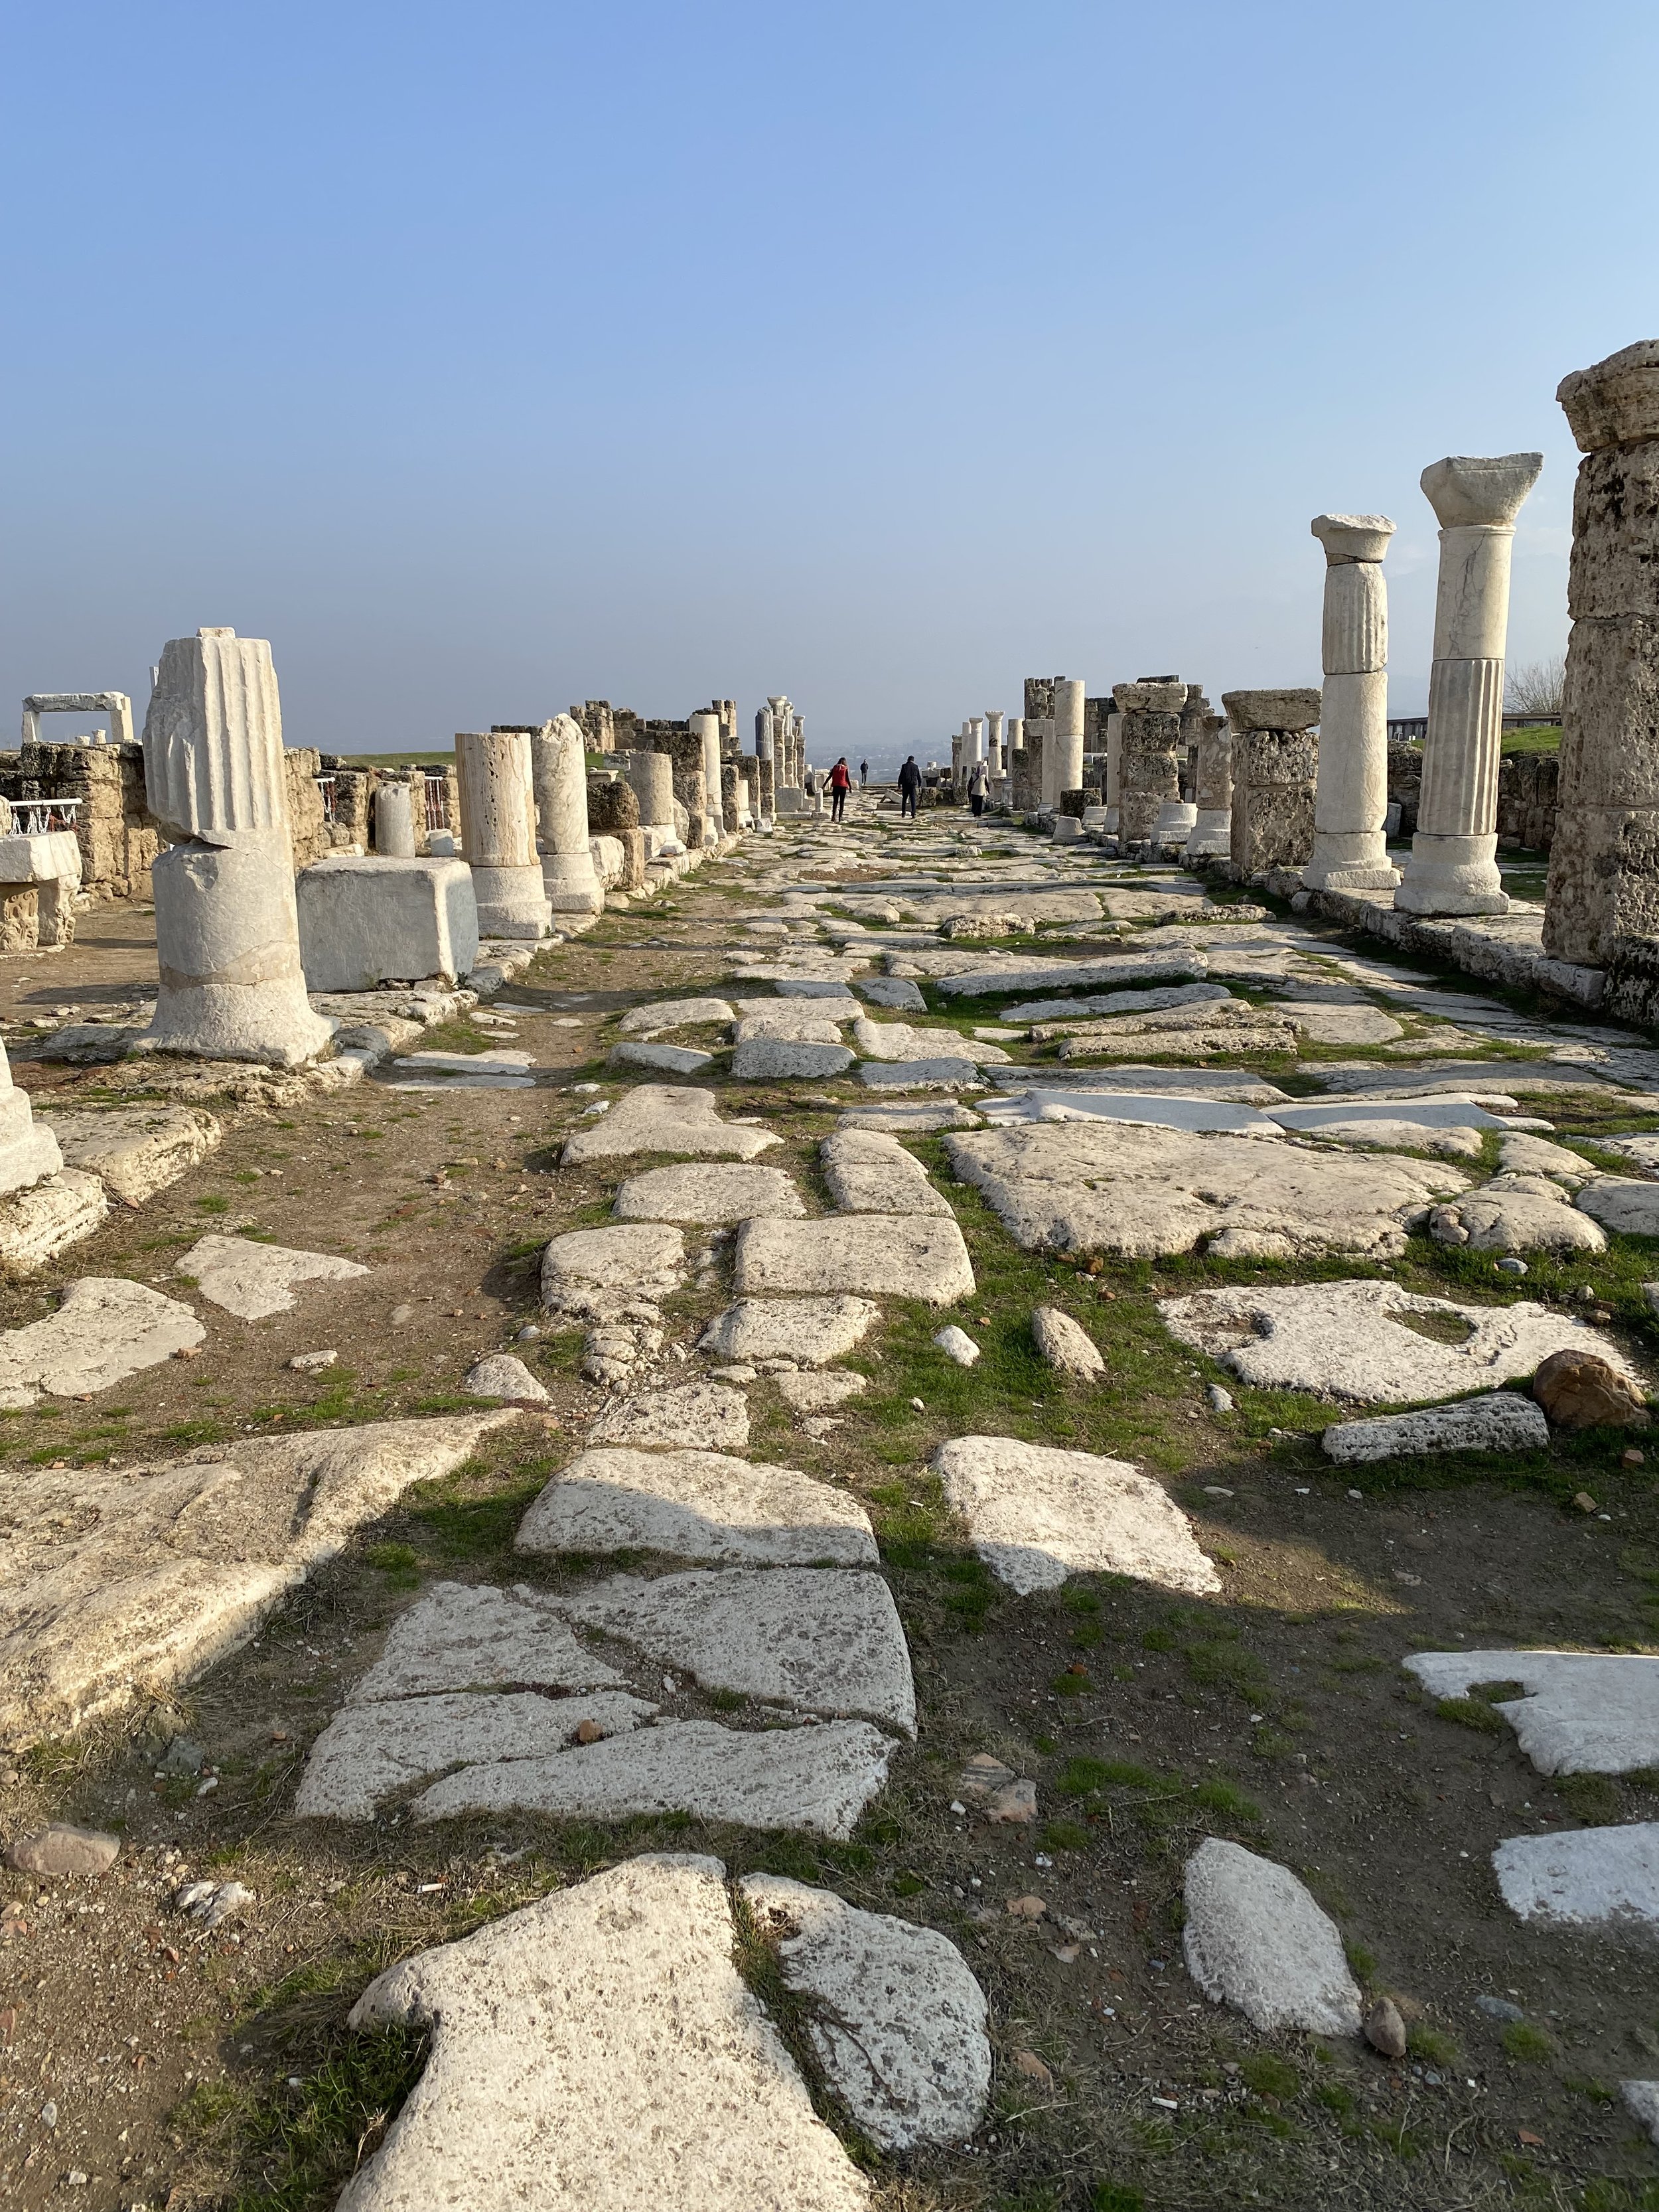 Archeologists are still excavating the sprawling ruins of ancient Laodicea.